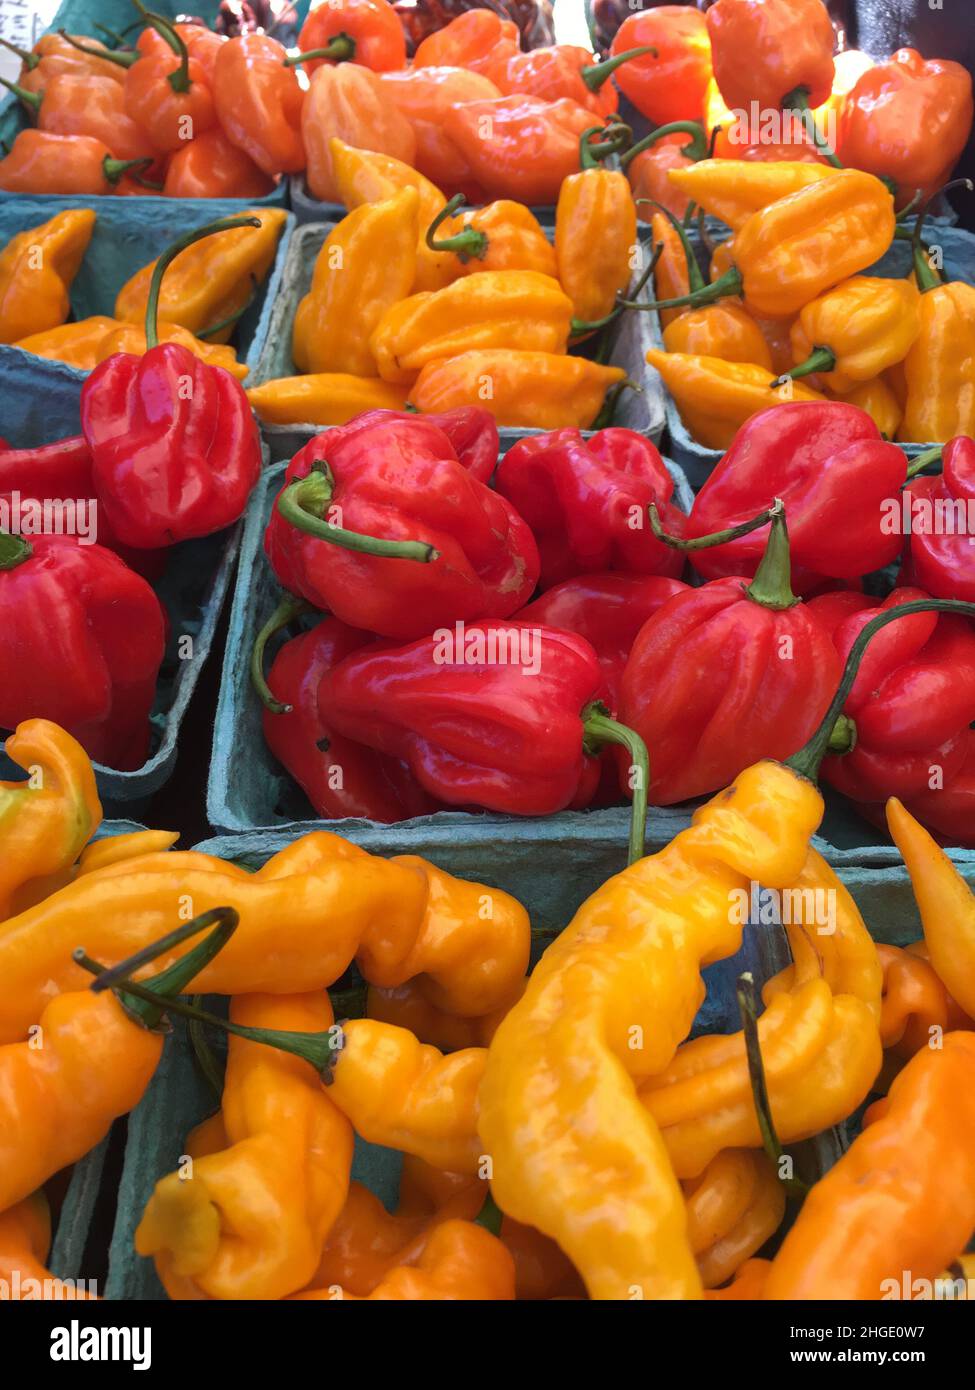 Hot chili peppers on display Stock Photo